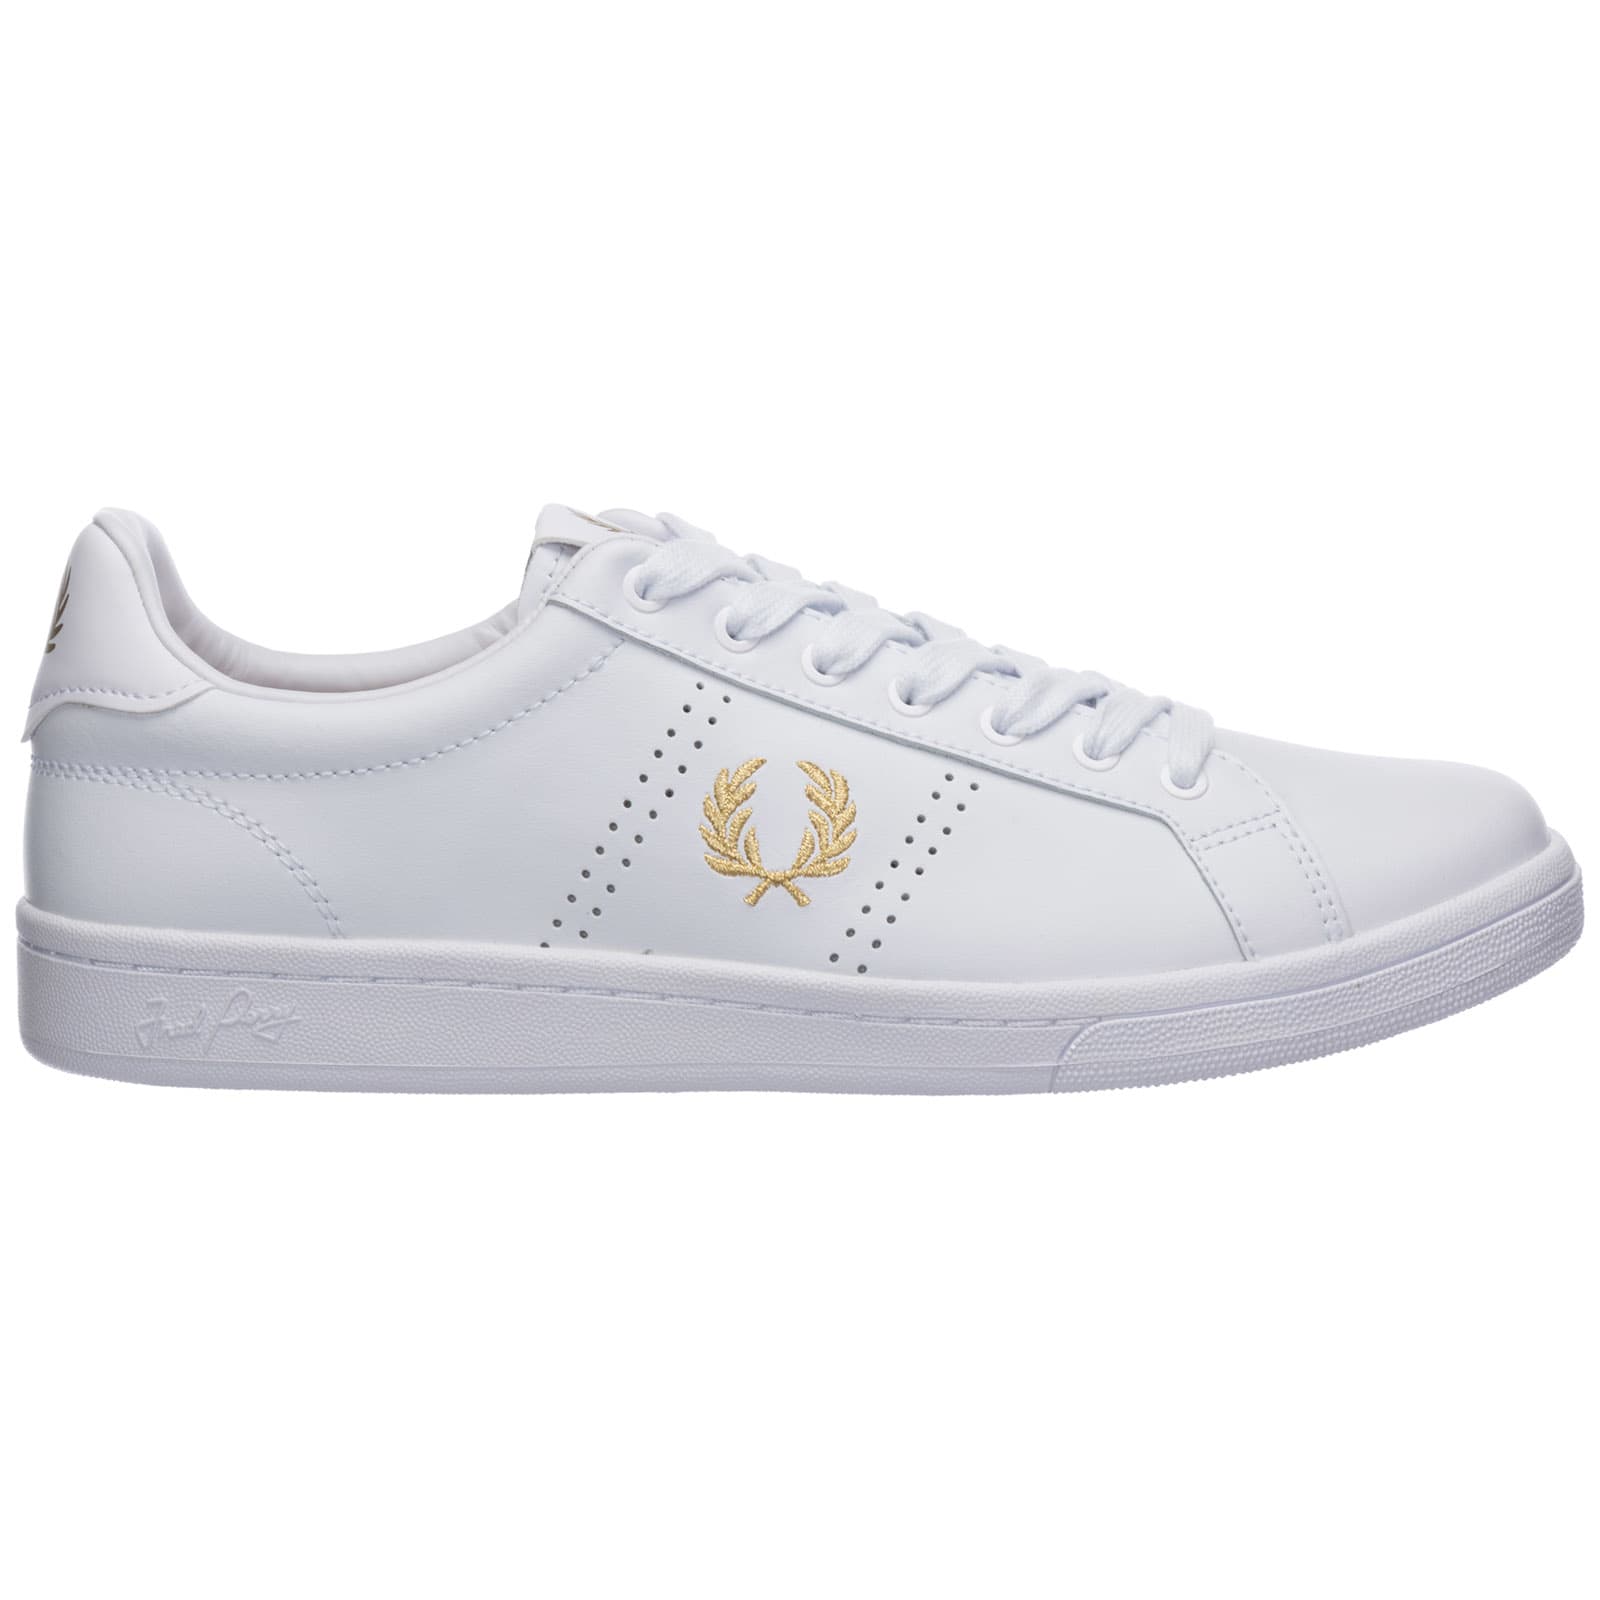 FRED PERRY B721 SNEAKERS,11329934